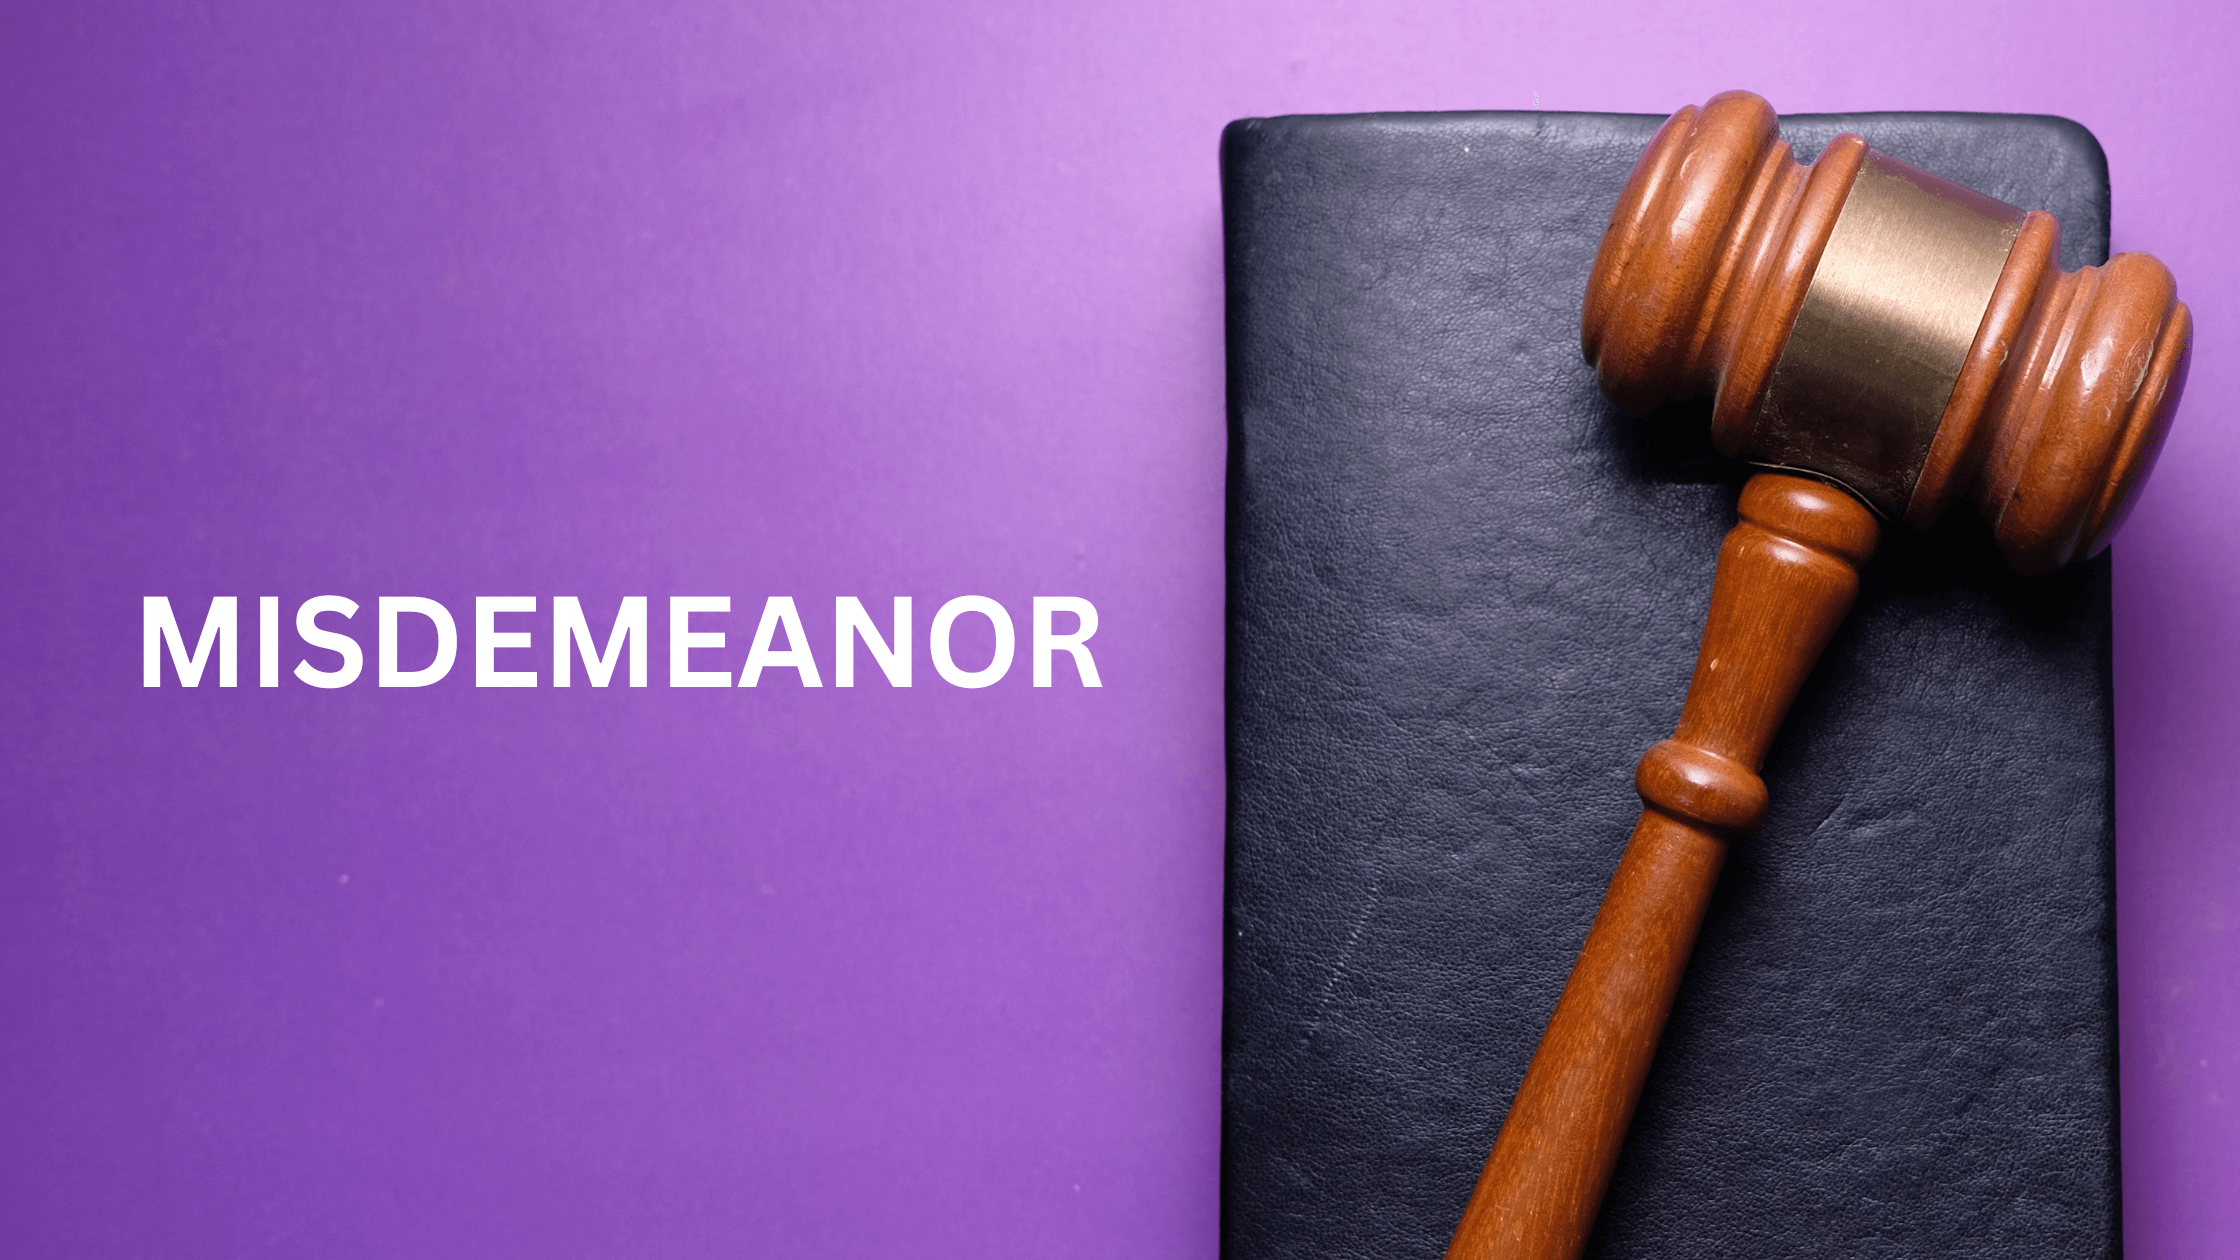 Gavel on legal book with MISDEMEANOR text on purple background.